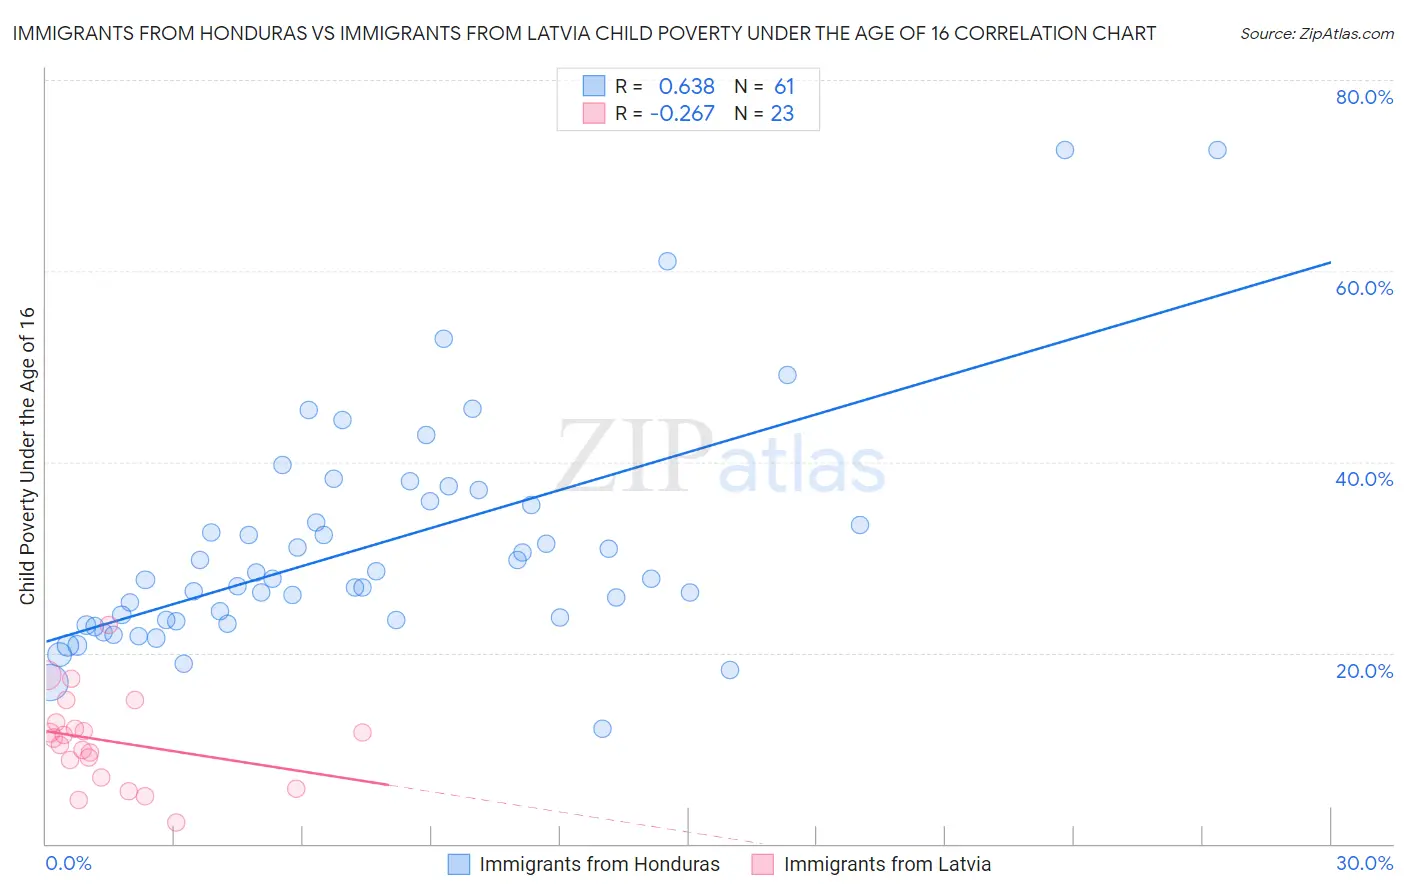 Immigrants from Honduras vs Immigrants from Latvia Child Poverty Under the Age of 16